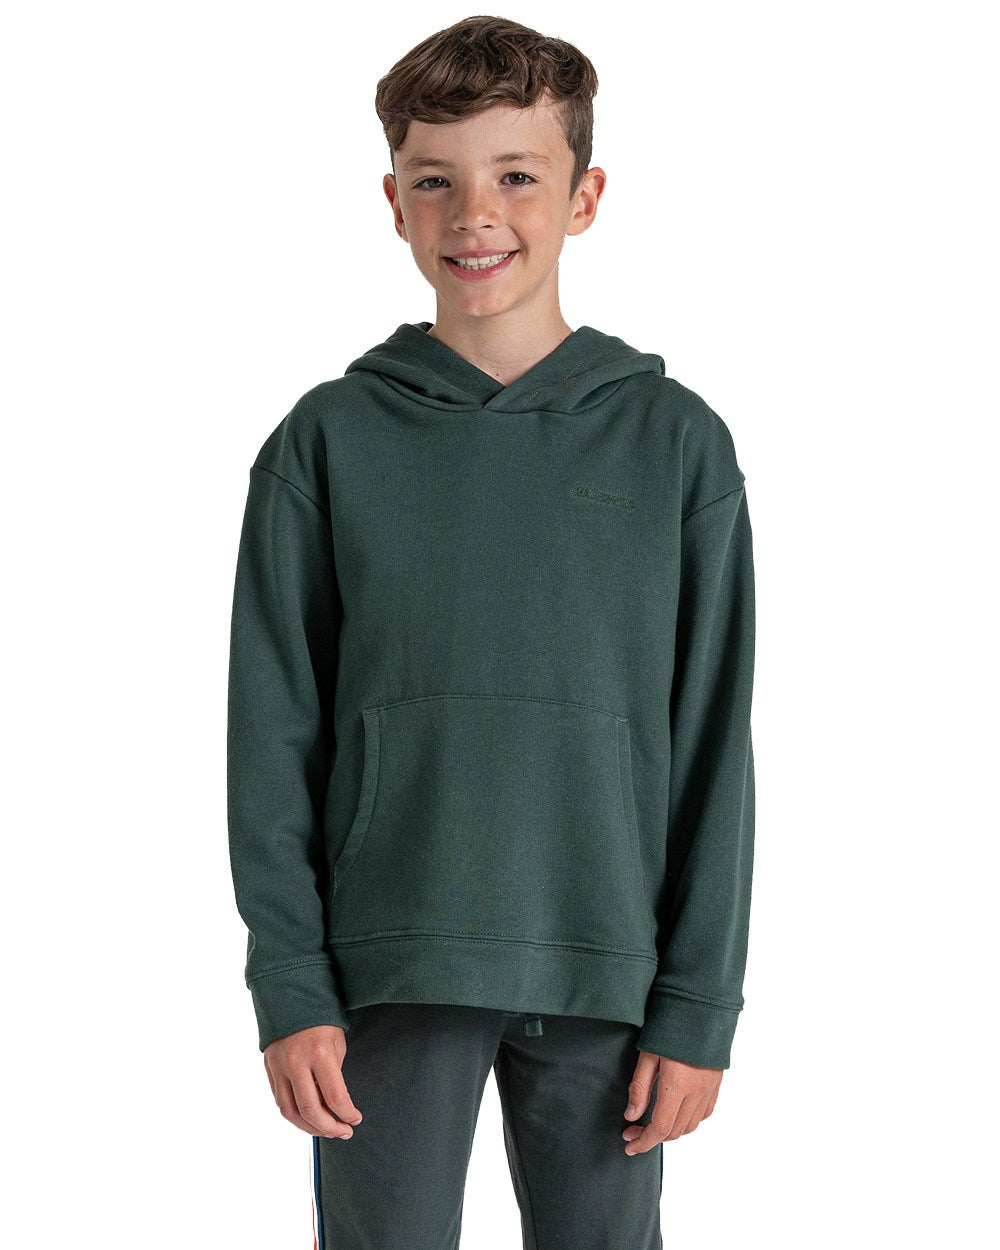 Spruce Green Coloured Craghoppers Childrens NosiLife Baylor Hooded Top On A White Background 